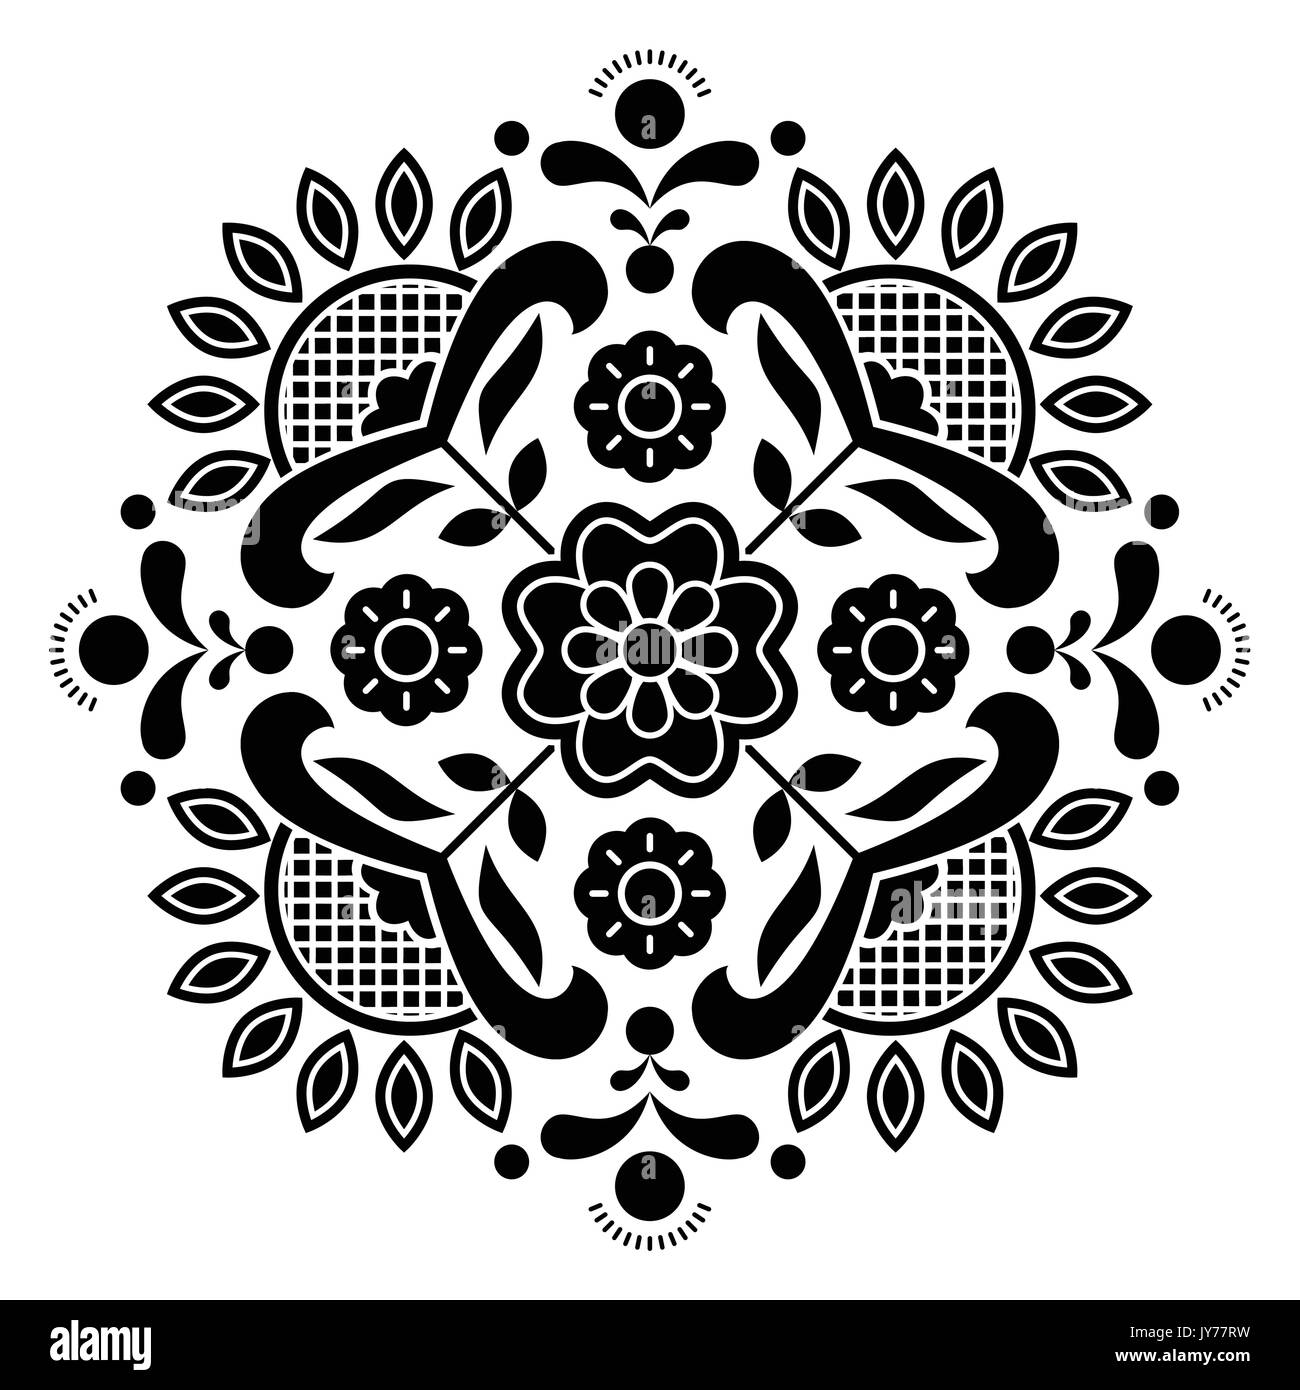 Norwegian black folk art Bunad pattern - Rosemaling style embroidery       Vector monochrome background of floral folk art from Norway isolated on whi Stock Vector